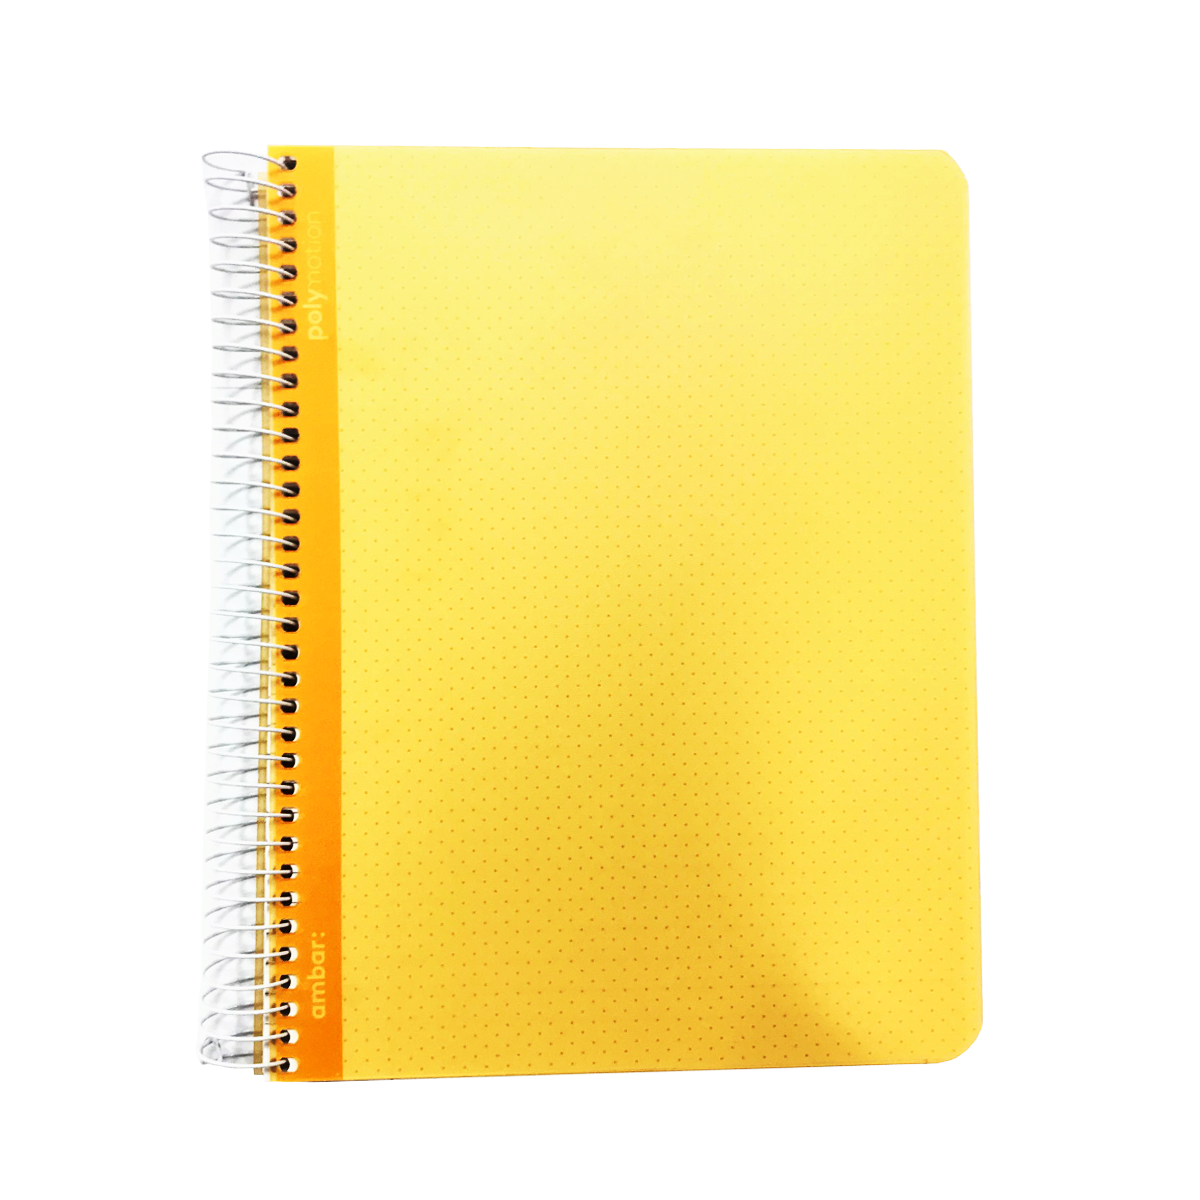 Ambar A5 Notebook 100 Pages Soft Cover 5MM